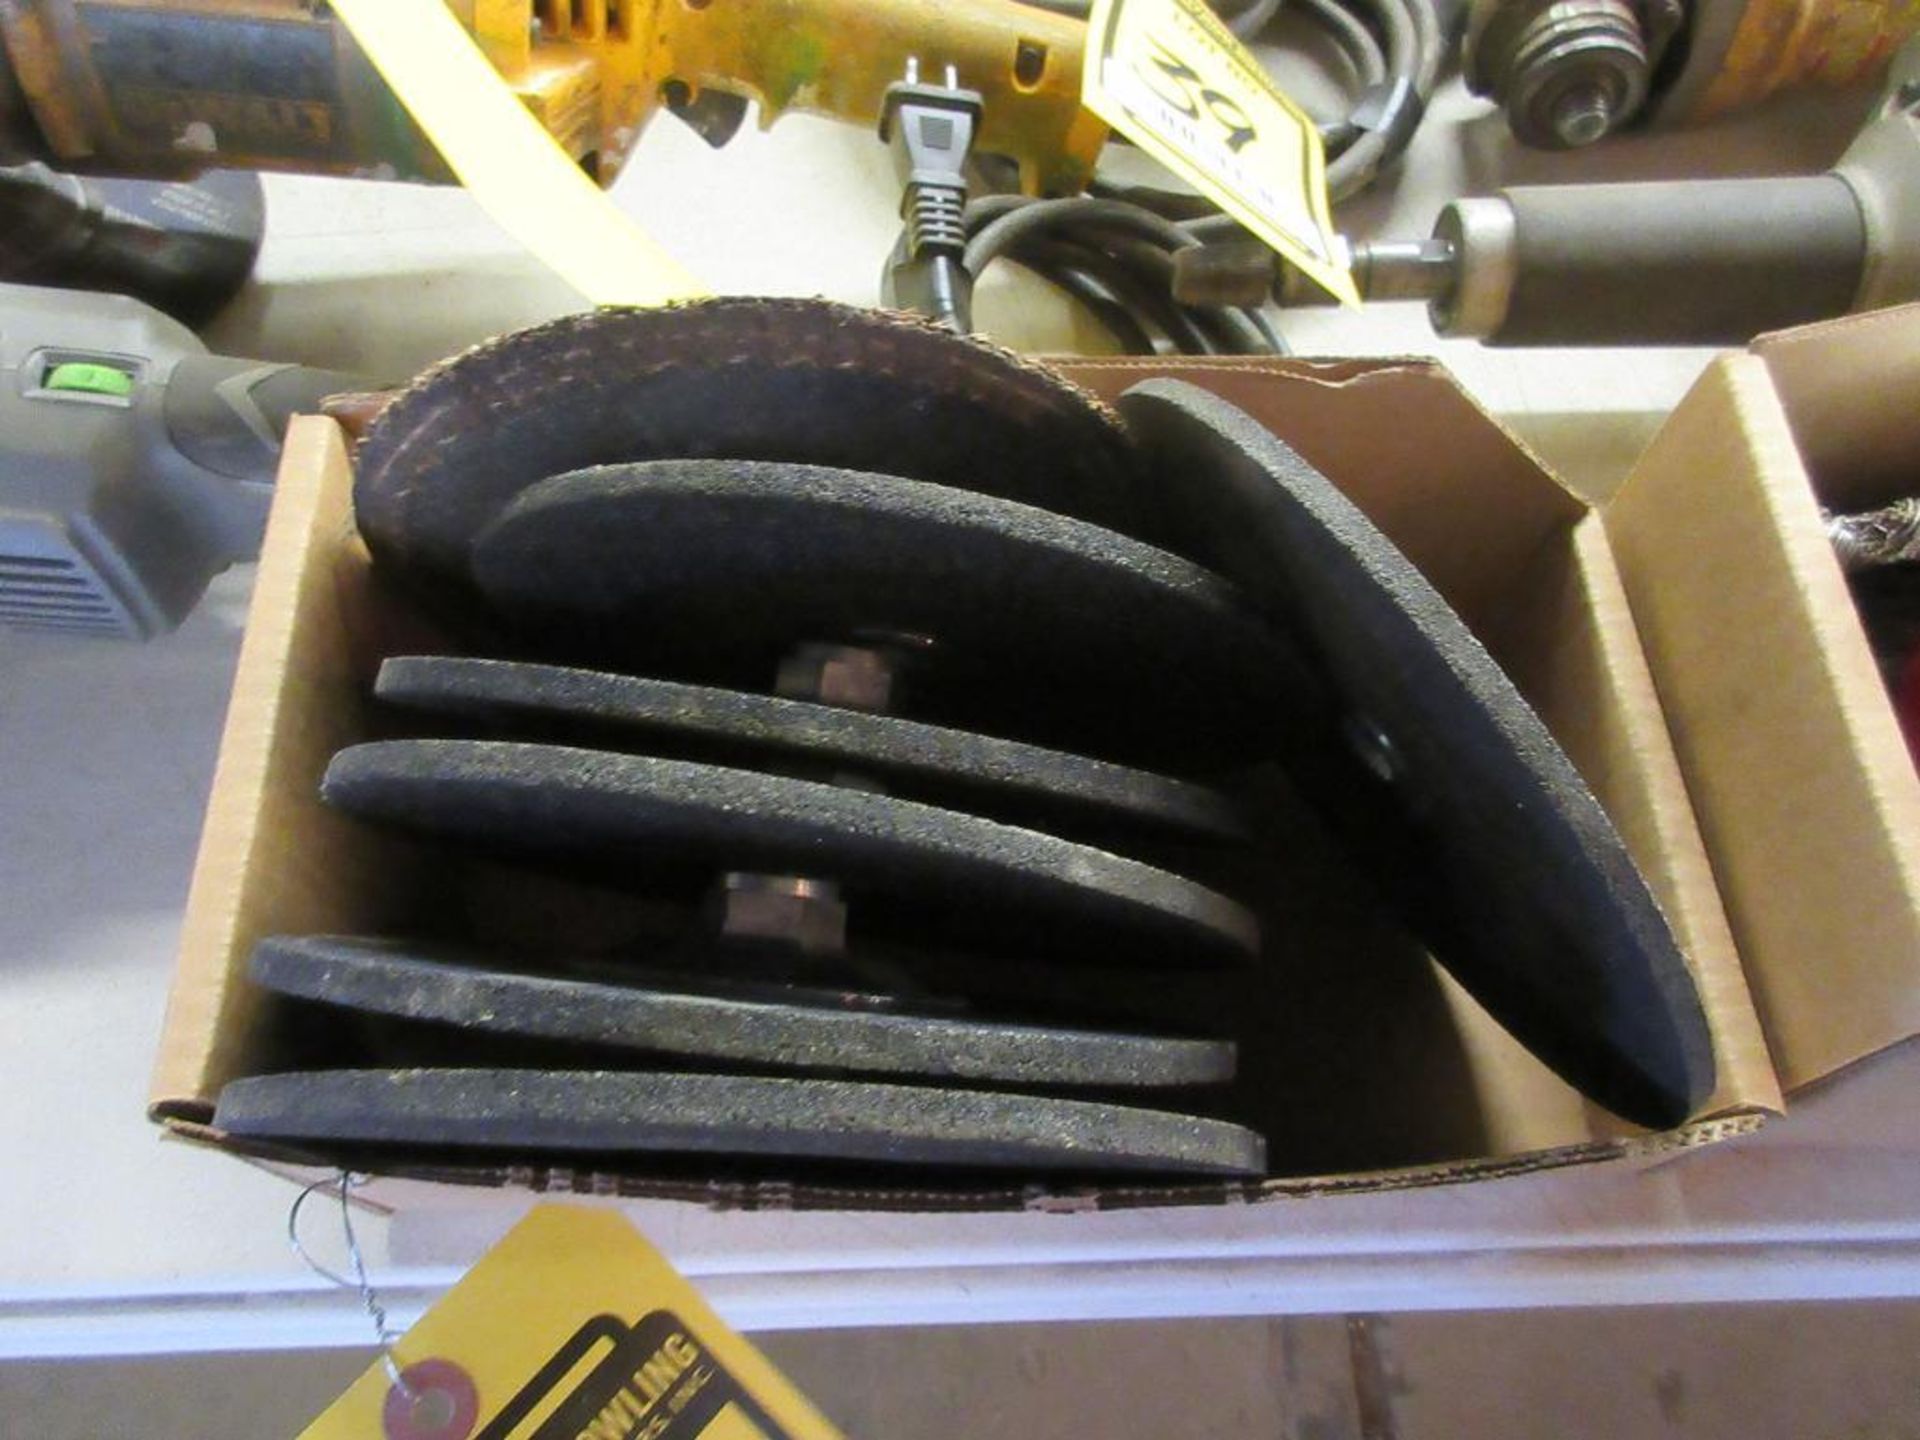 (2) BOXES W/ 7'' GRINDING WHEELS & BRAIDED WIRE DISCS